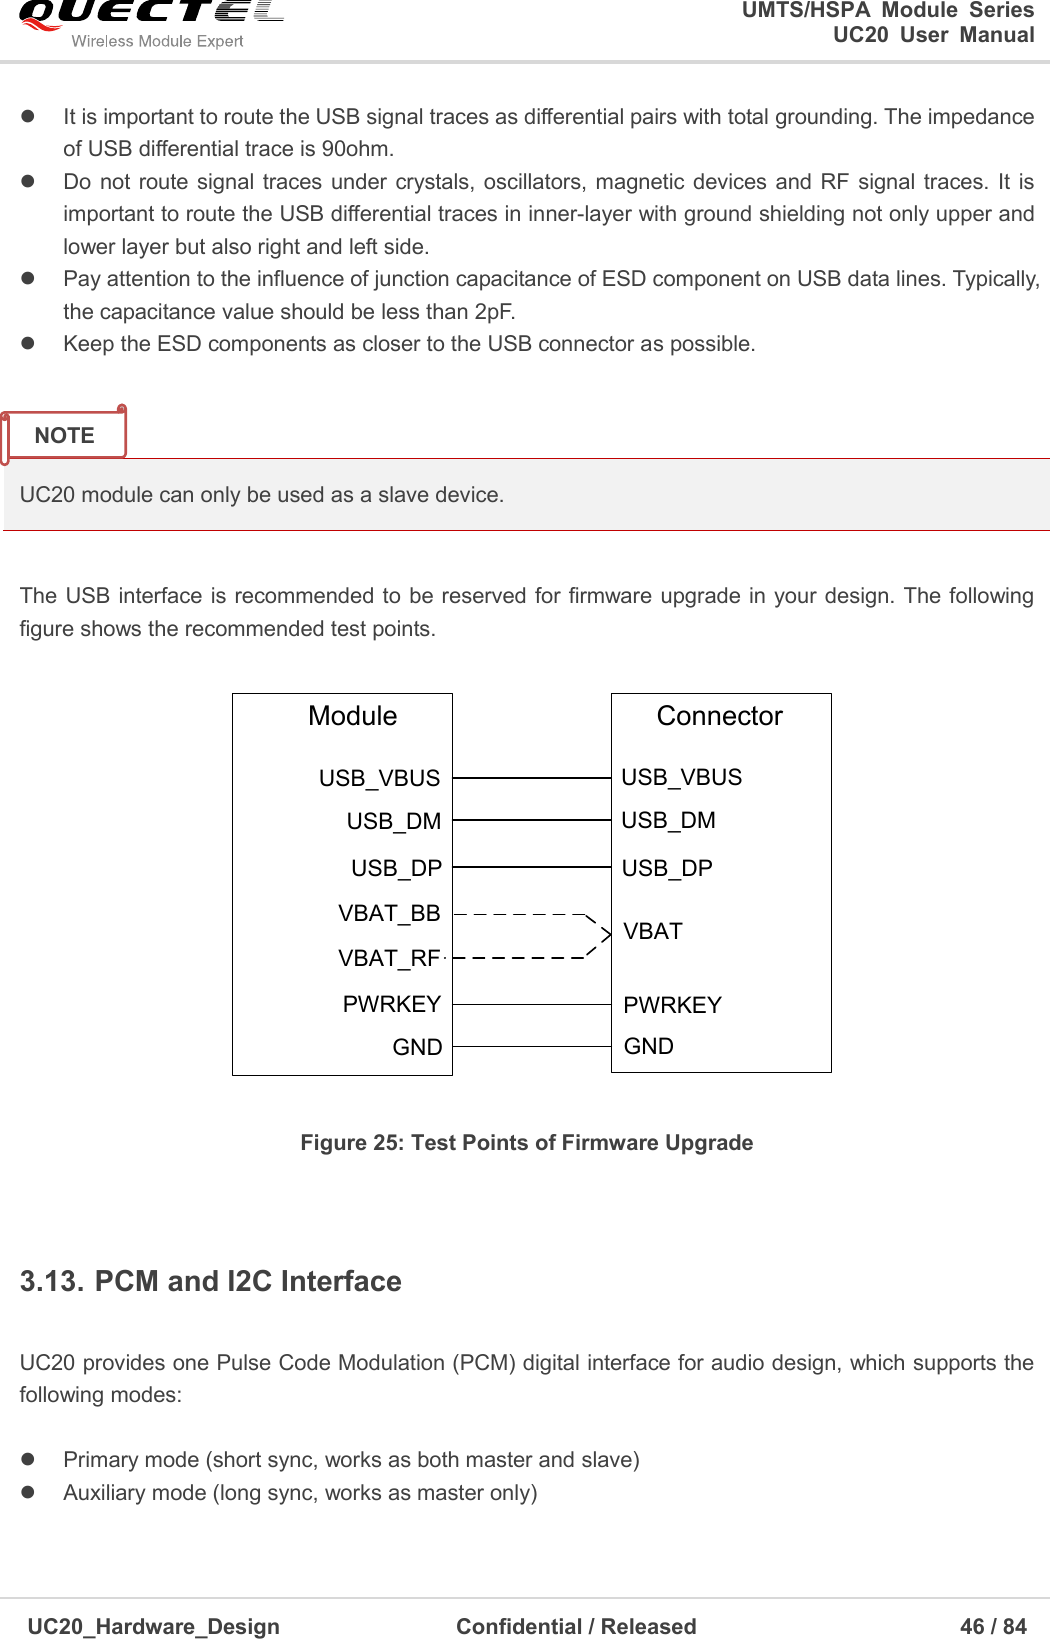                                                                                                                                               UMTS/HSPA  Module  Series                                                                 UC20  User  Manual  UC20_Hardware_Design                  Confidential / Released                            46 / 84       It is important to route the USB signal traces as differential pairs with total grounding. The impedance of USB differential trace is 90ohm.   Do not route signal traces  under  crystals, oscillators, magnetic devices and RF  signal traces. It  is important to route the USB differential traces in inner-layer with ground shielding not only upper and lower layer but also right and left side.   Pay attention to the influence of junction capacitance of ESD component on USB data lines. Typically, the capacitance value should be less than 2pF.   Keep the ESD components as closer to the USB connector as possible.   UC20 module can only be used as a slave device.  The USB interface is recommended to be reserved for firmware upgrade in your design. The following figure shows the recommended test points.   ModuleUSB_DMUSB_DPVBAT_BBUSB_VBUSPWRKEYGNDVBAT_RFUSB_DMUSB_DPVBATUSB_VBUSPWRKEYGNDConnector Figure 25: Test Points of Firmware Upgrade  3.13. PCM and I2C Interface  UC20 provides one Pulse Code Modulation (PCM) digital interface for audio design, which supports the following modes:    Primary mode (short sync, works as both master and slave)   Auxiliary mode (long sync, works as master only)  NOTE 